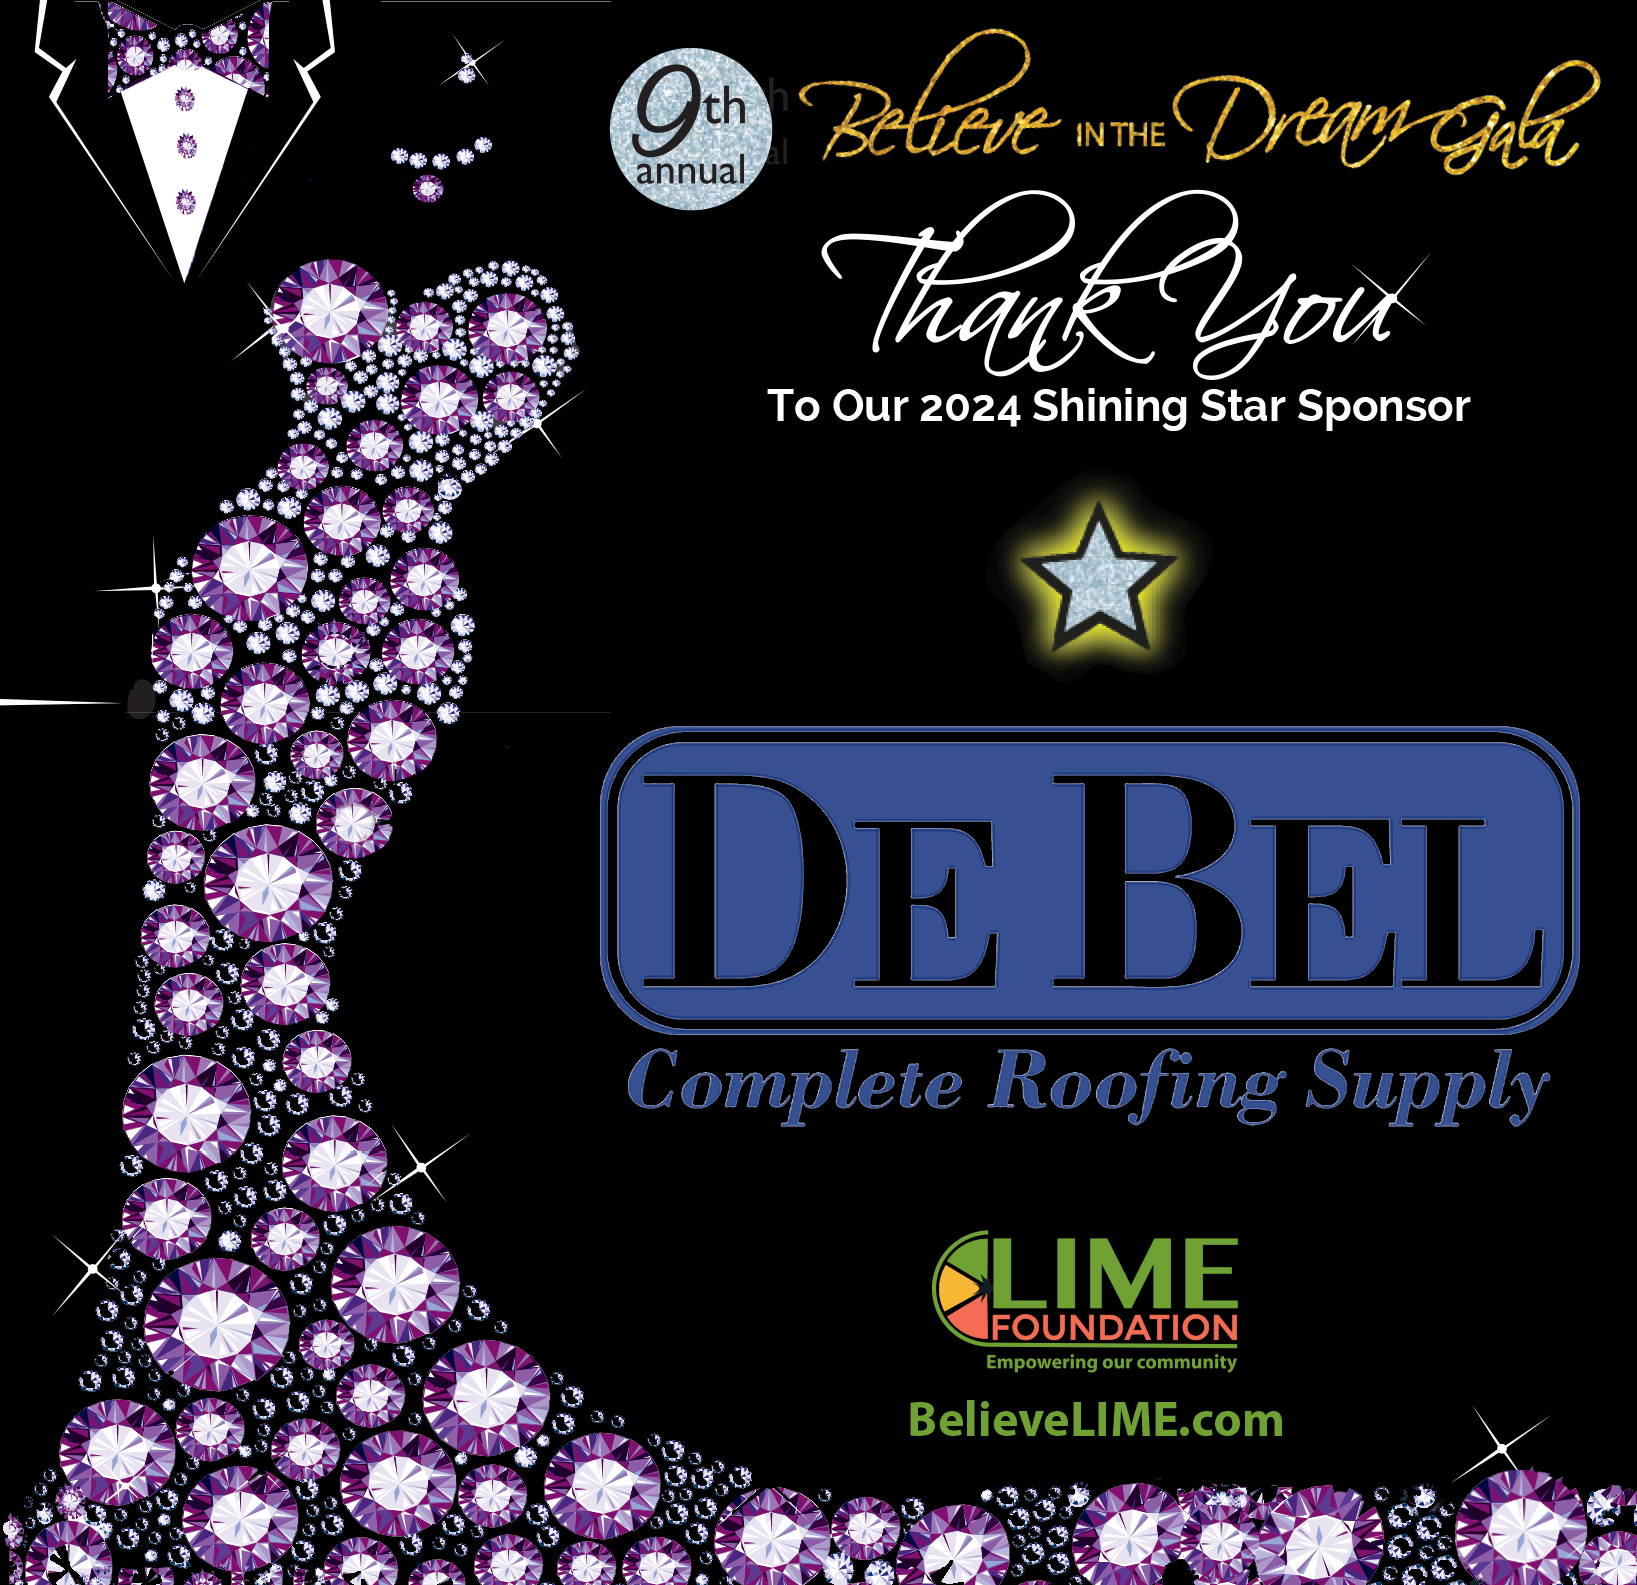 Promotional image for the 9th annual "Believe in the Dream" gala featuring a stylized woman in a gown made of flowers, thanking "de bel roofing" and other sponsors.